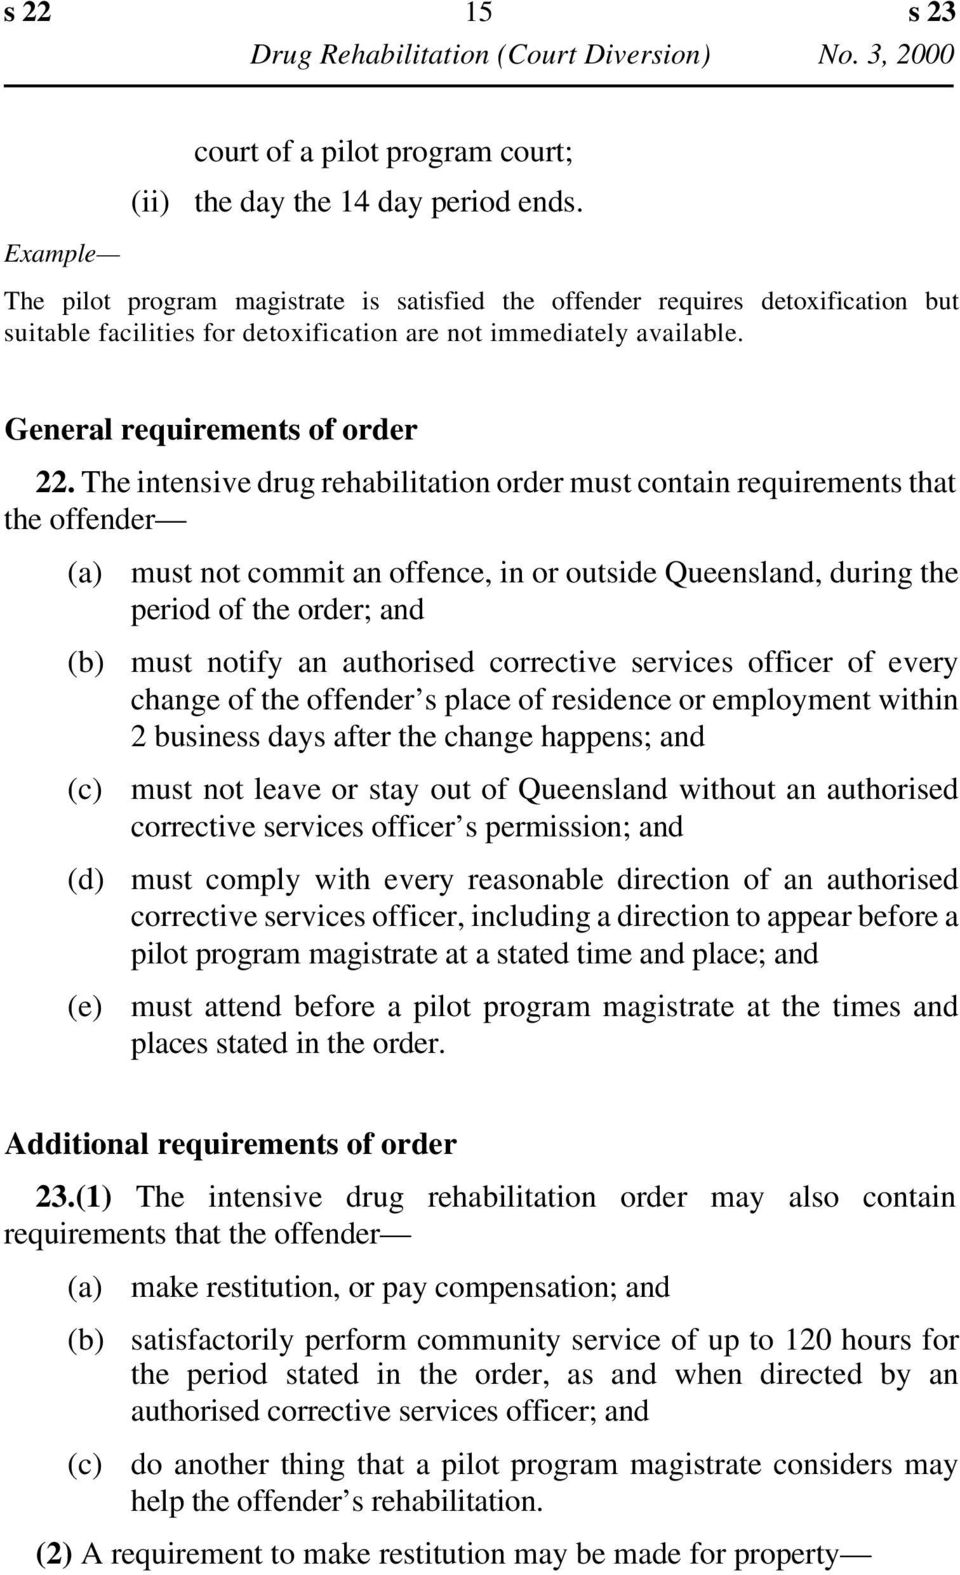 The intensive drug rehabilitation order must contain requirements that the offender (d) (e) must not commit an offence, in or outside Queensland, during the period of the order; and must notify an